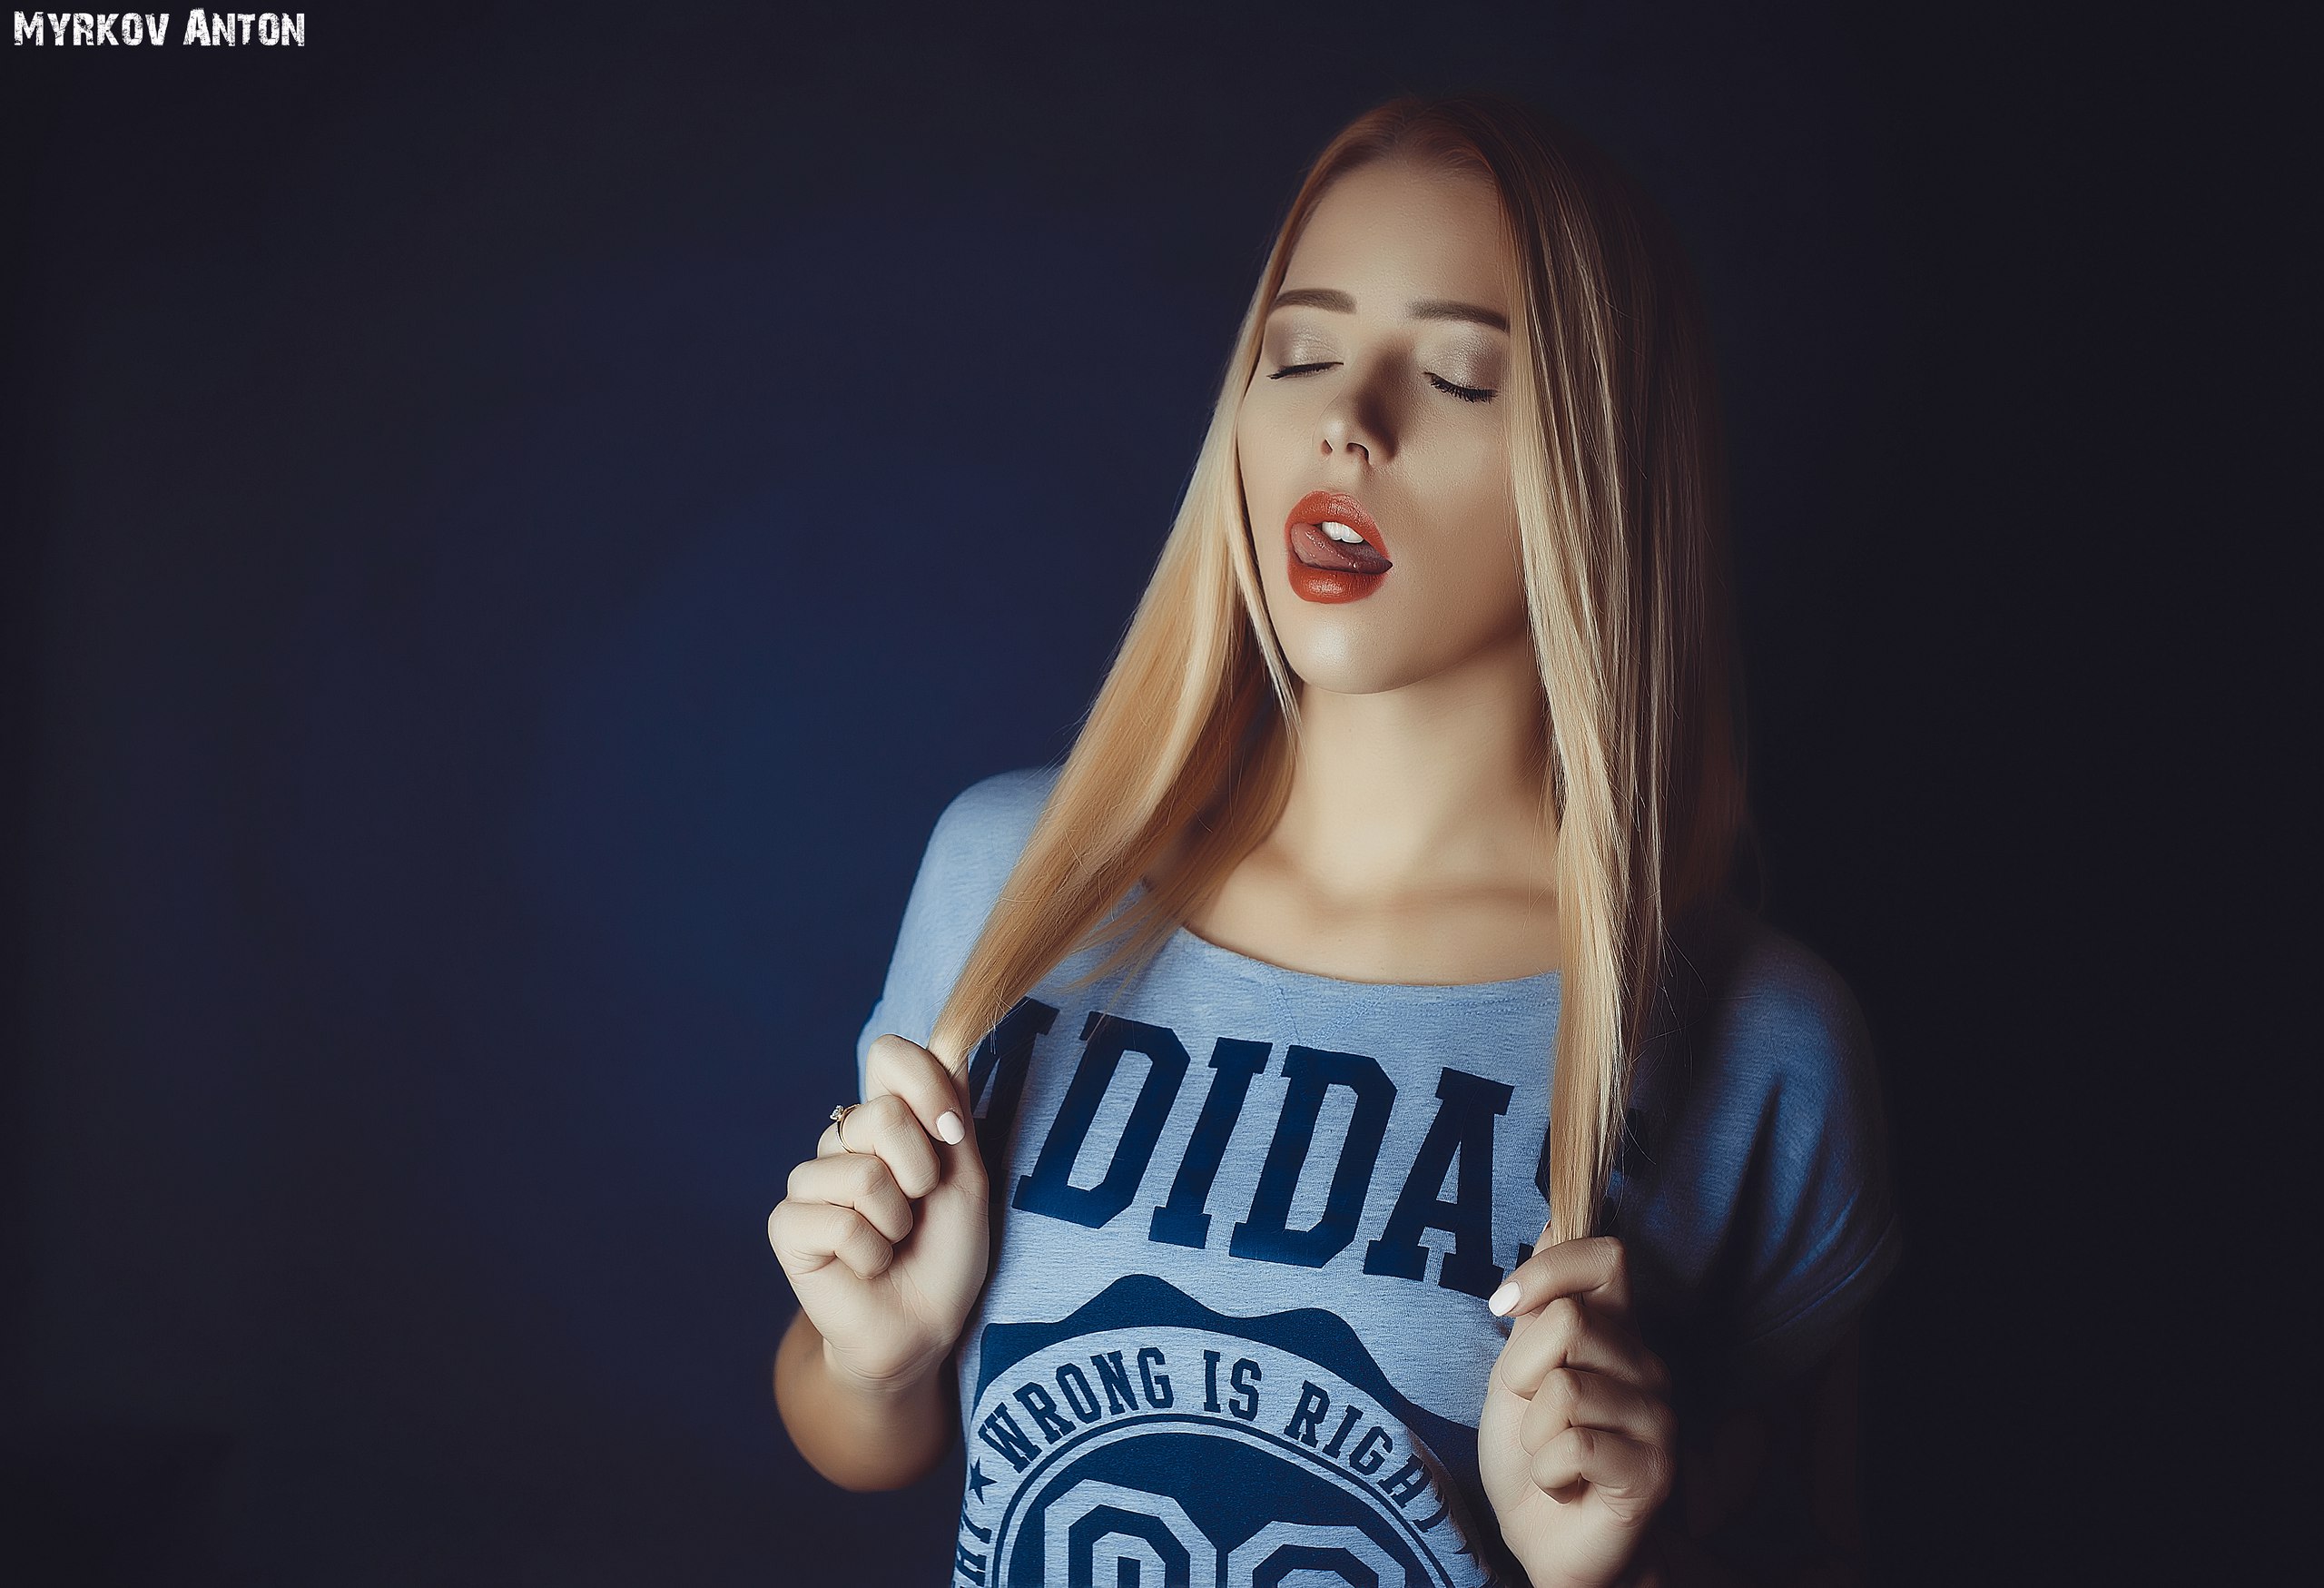 Women Blonde Closed Eyes Simple Background T Shirt Tongues Hands In Hair Portrait Anton Myrkov Long  2560x1749